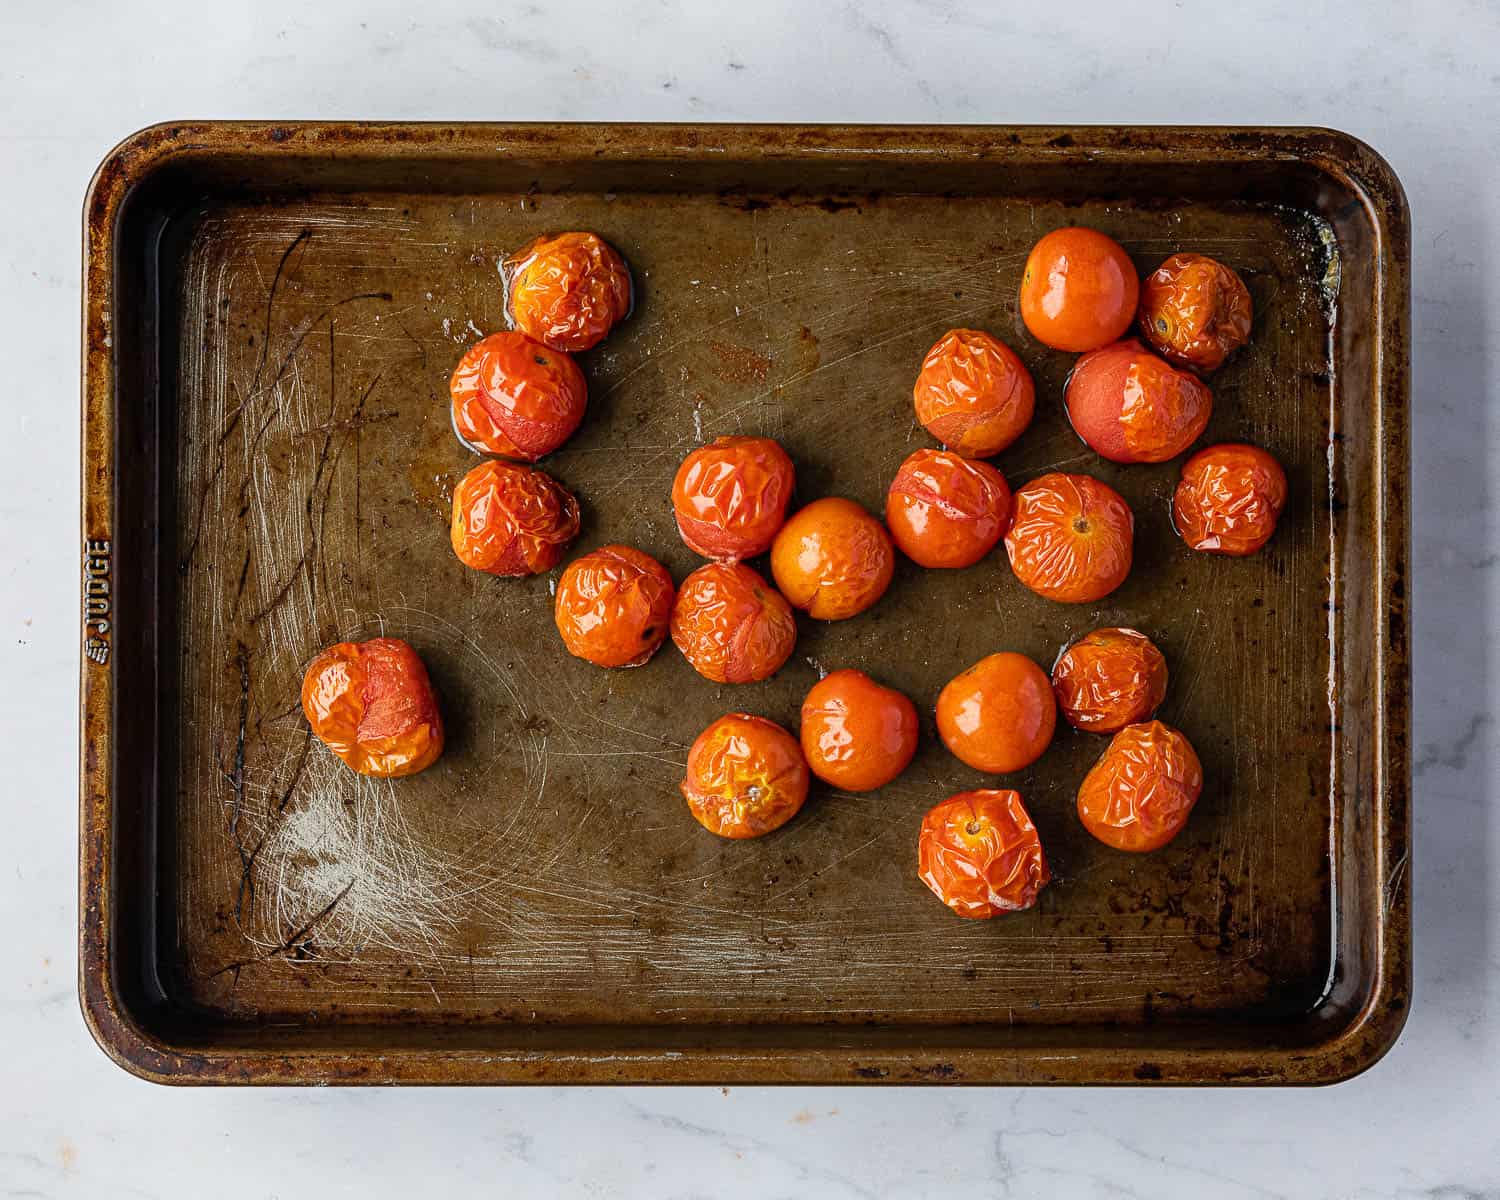 Step 5, the roasted tomatoes.